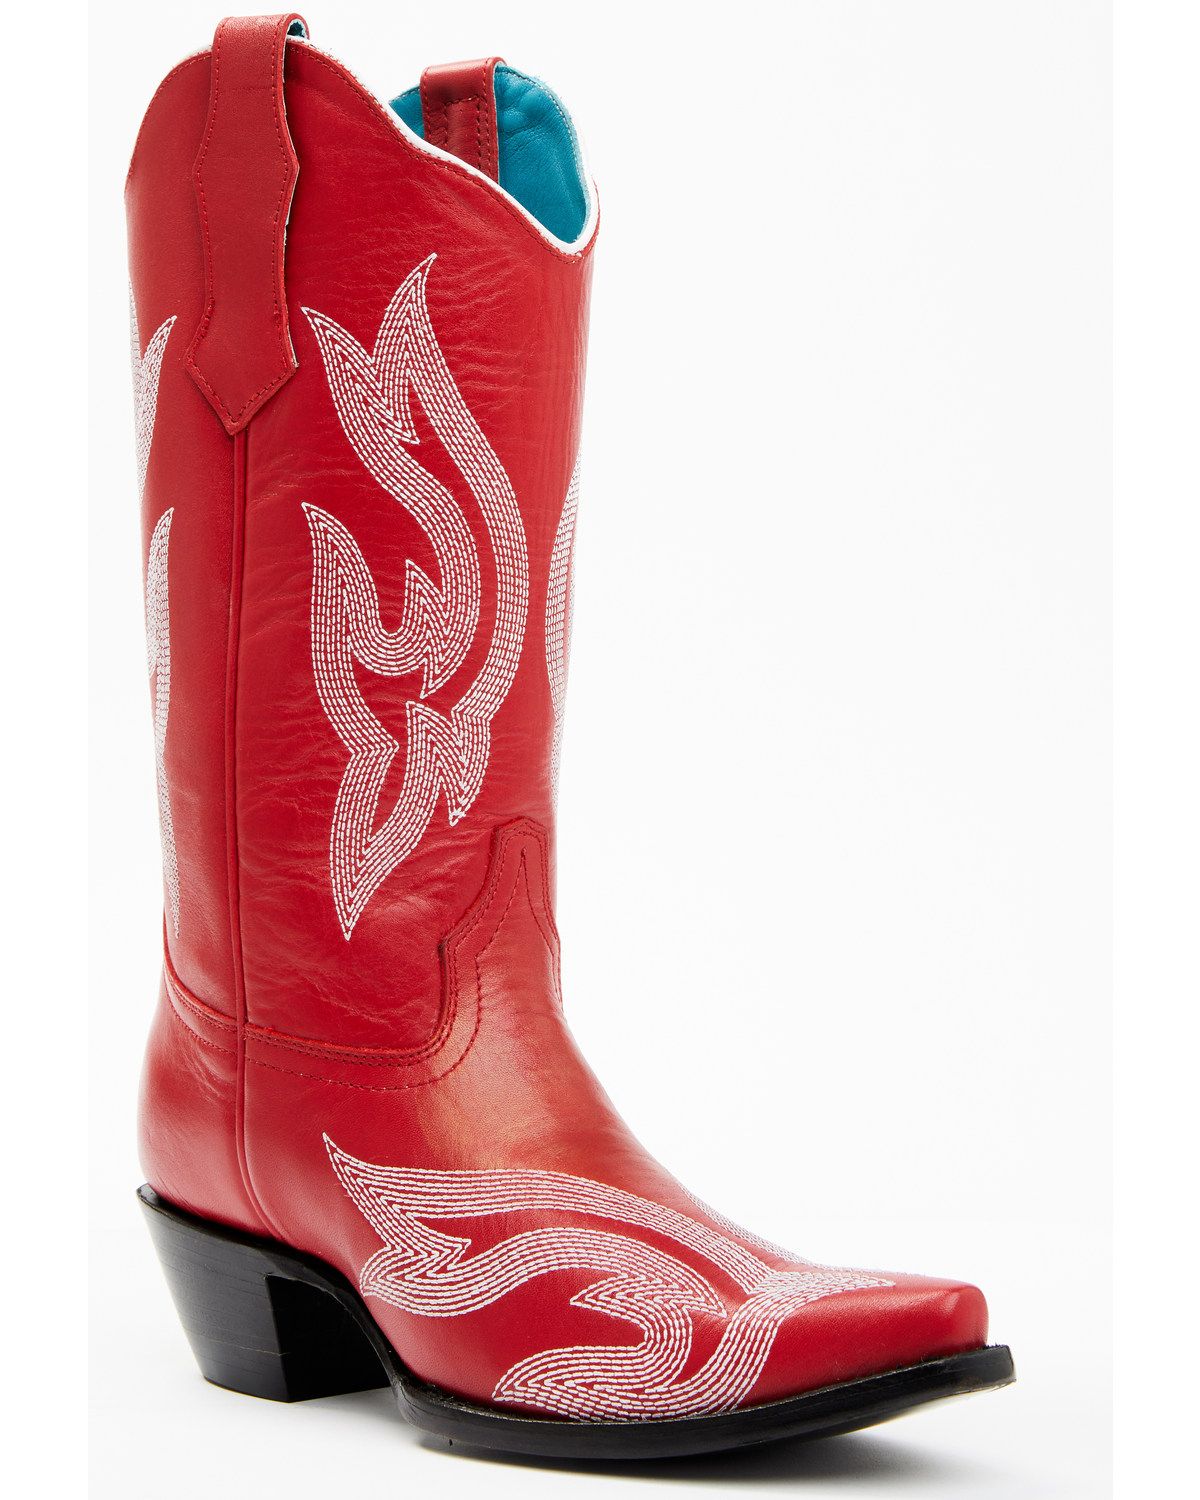 Planet Cowboy Women's Candy Cane Western Boots - Snip Toe